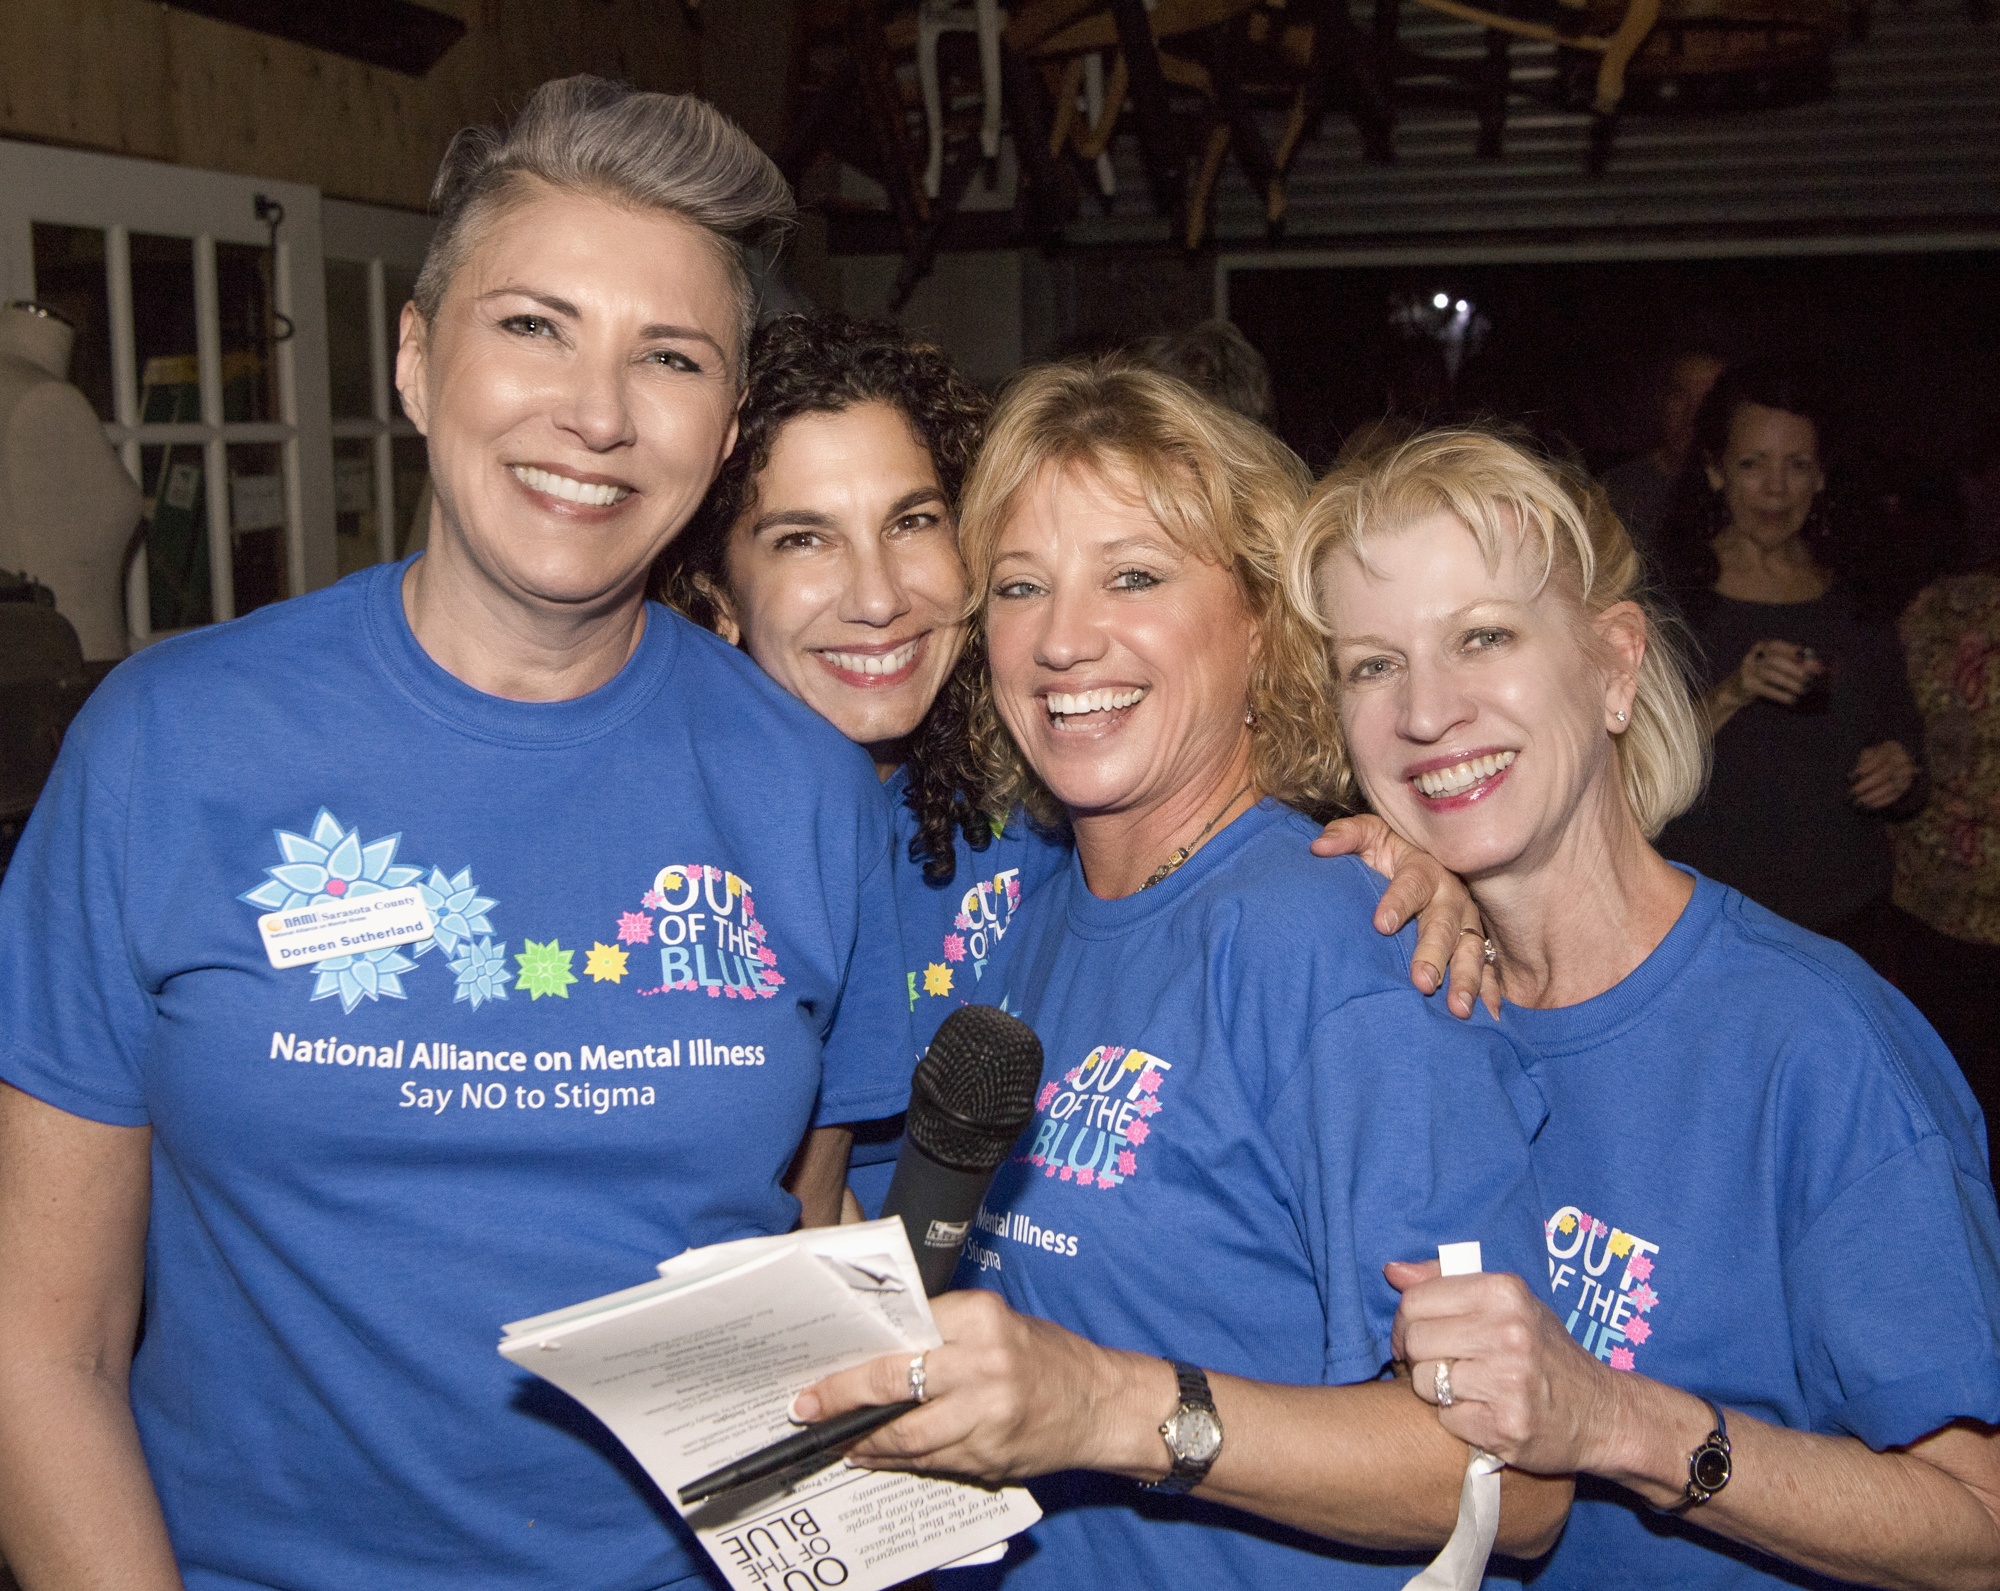 Chairwoman Doreen Sutherland, Wendy Abramson, Pam McCurdy and Jamie Barrett — Photo by Cliff Roles